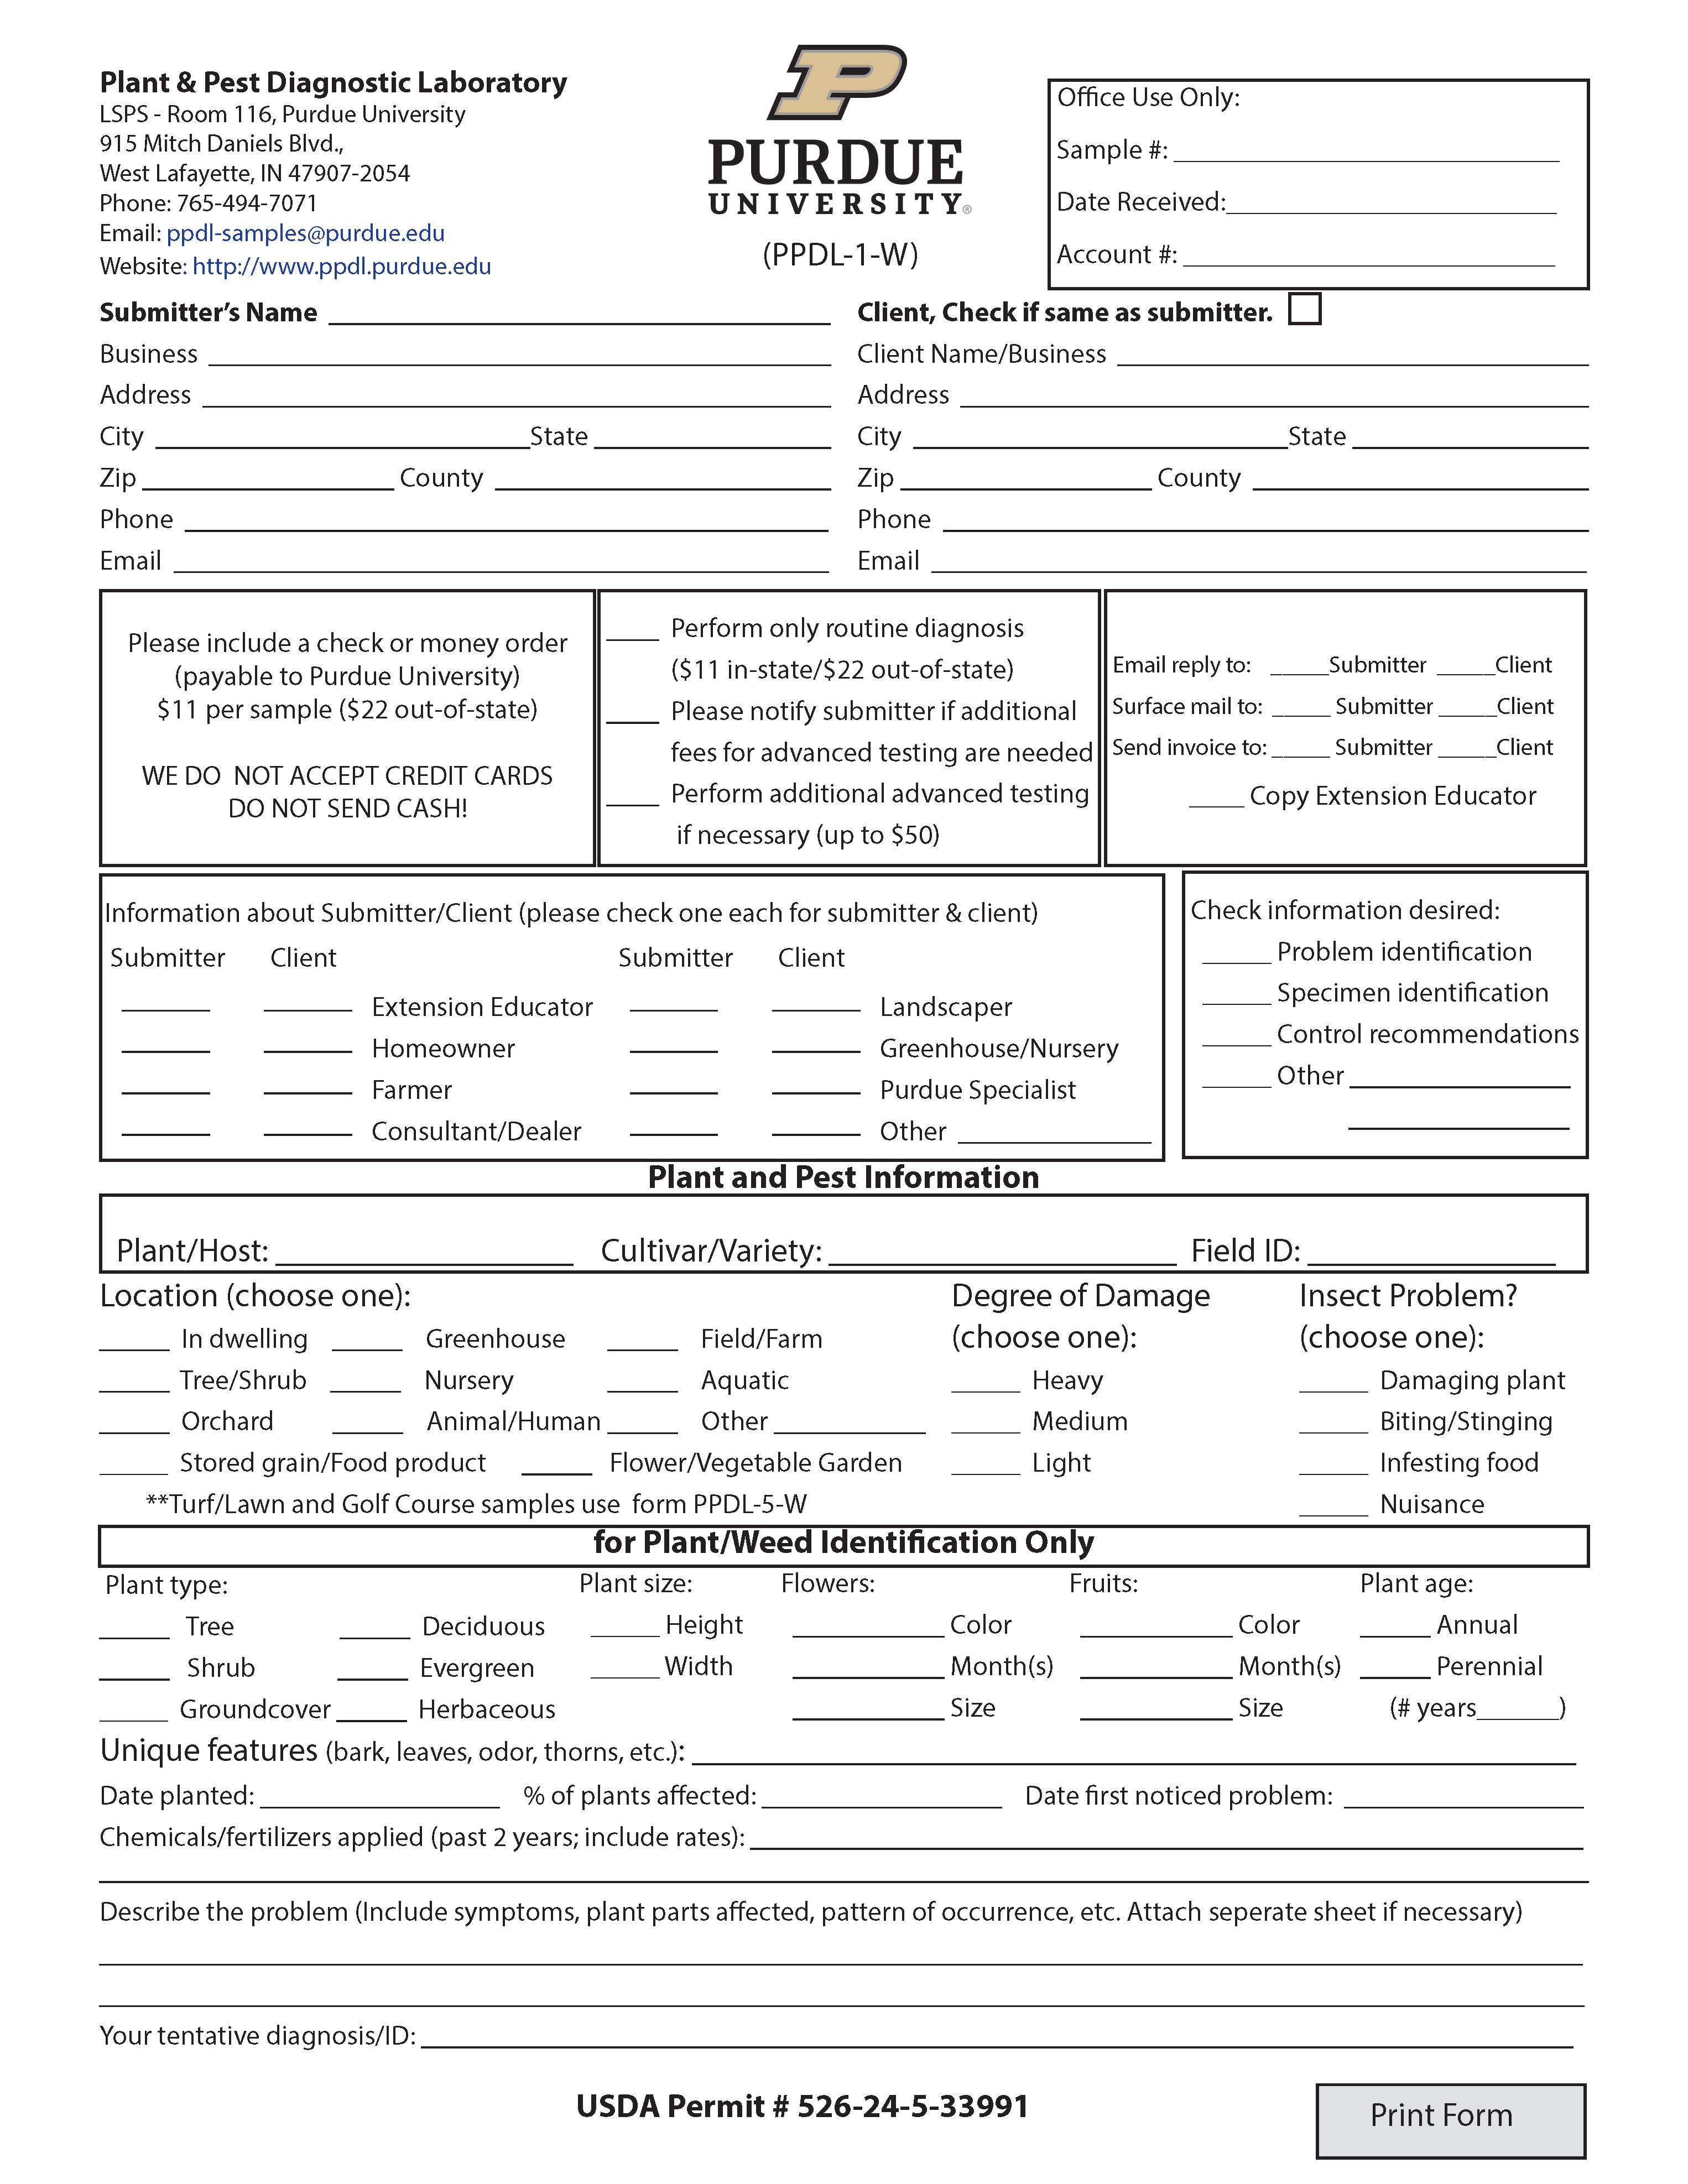 Physical Submission form